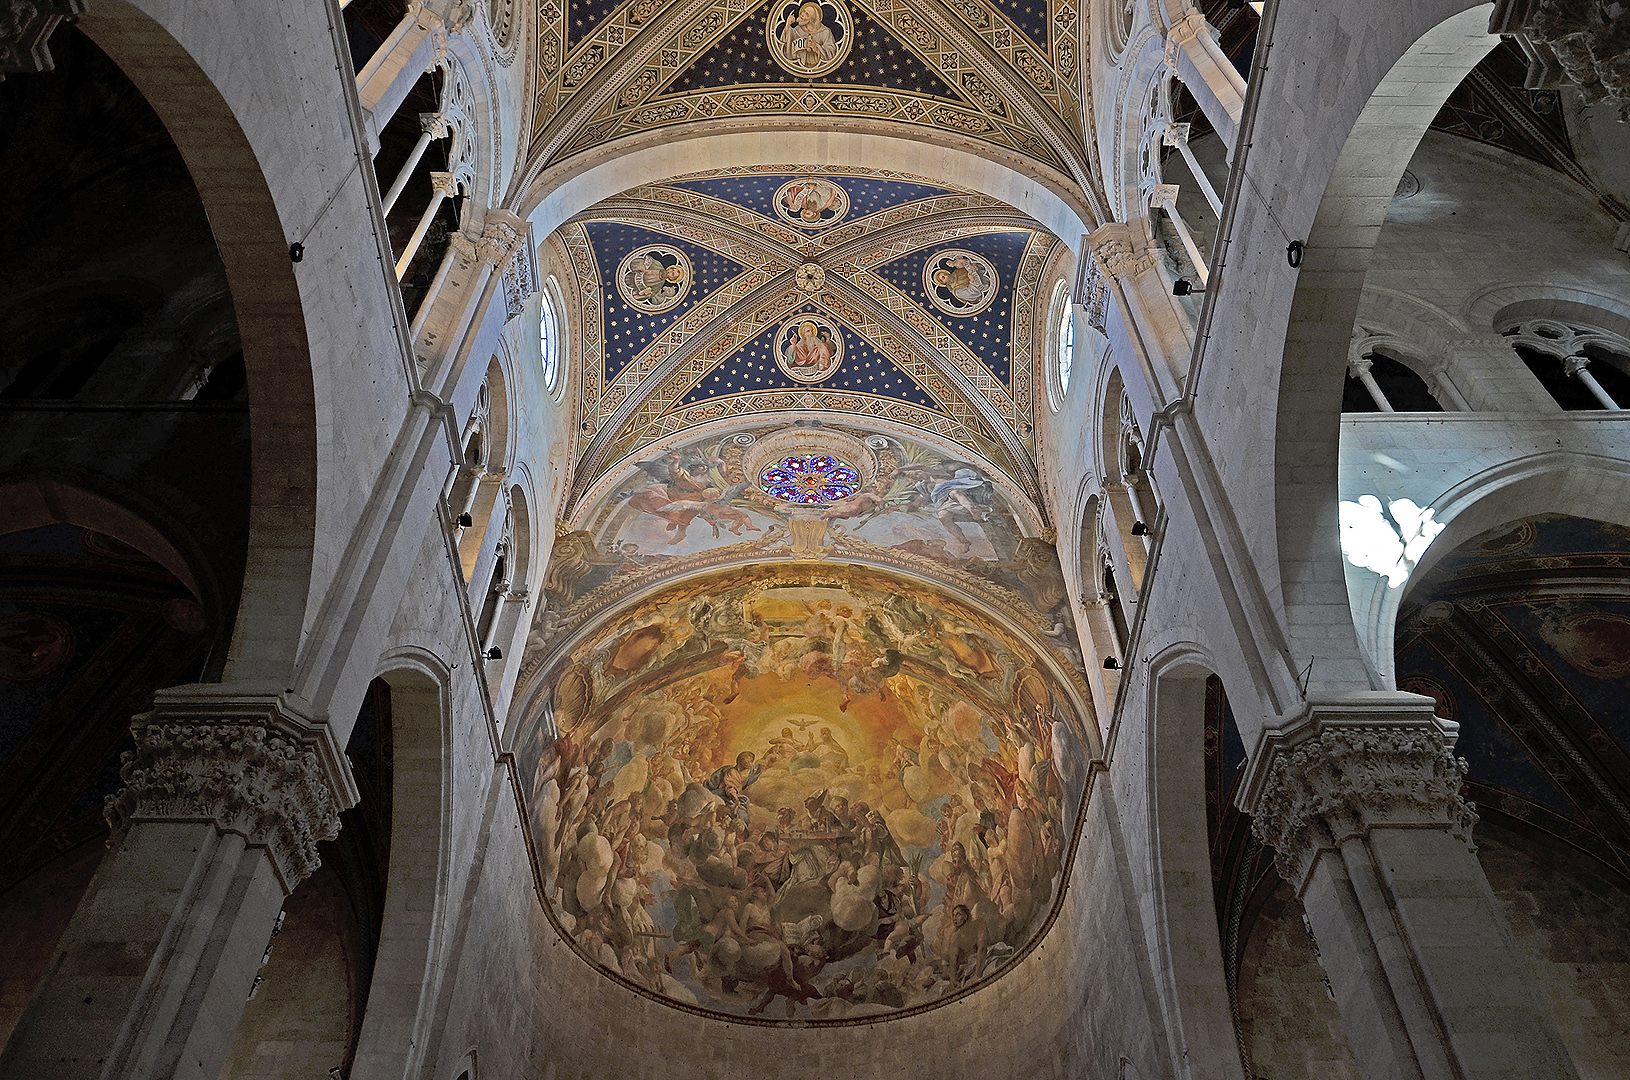 Kathedraal van Lucca, Toscane, Itali, Lucca Cathedral, Lucca, Tuscany, Italy